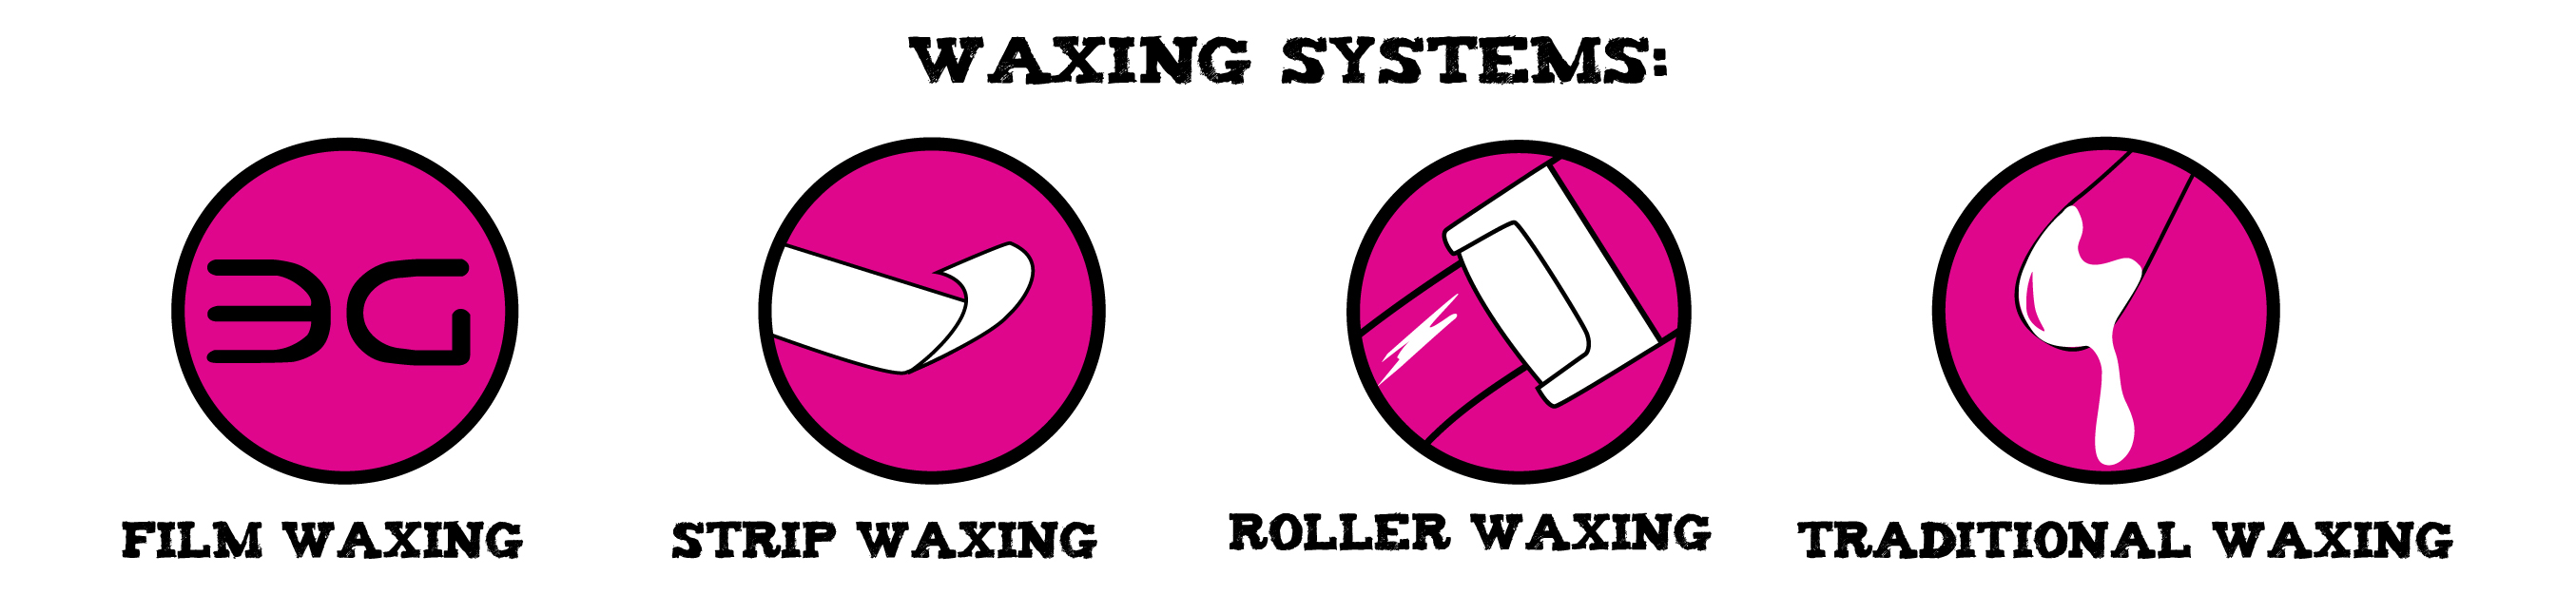 Waxing Systems-03.jpg